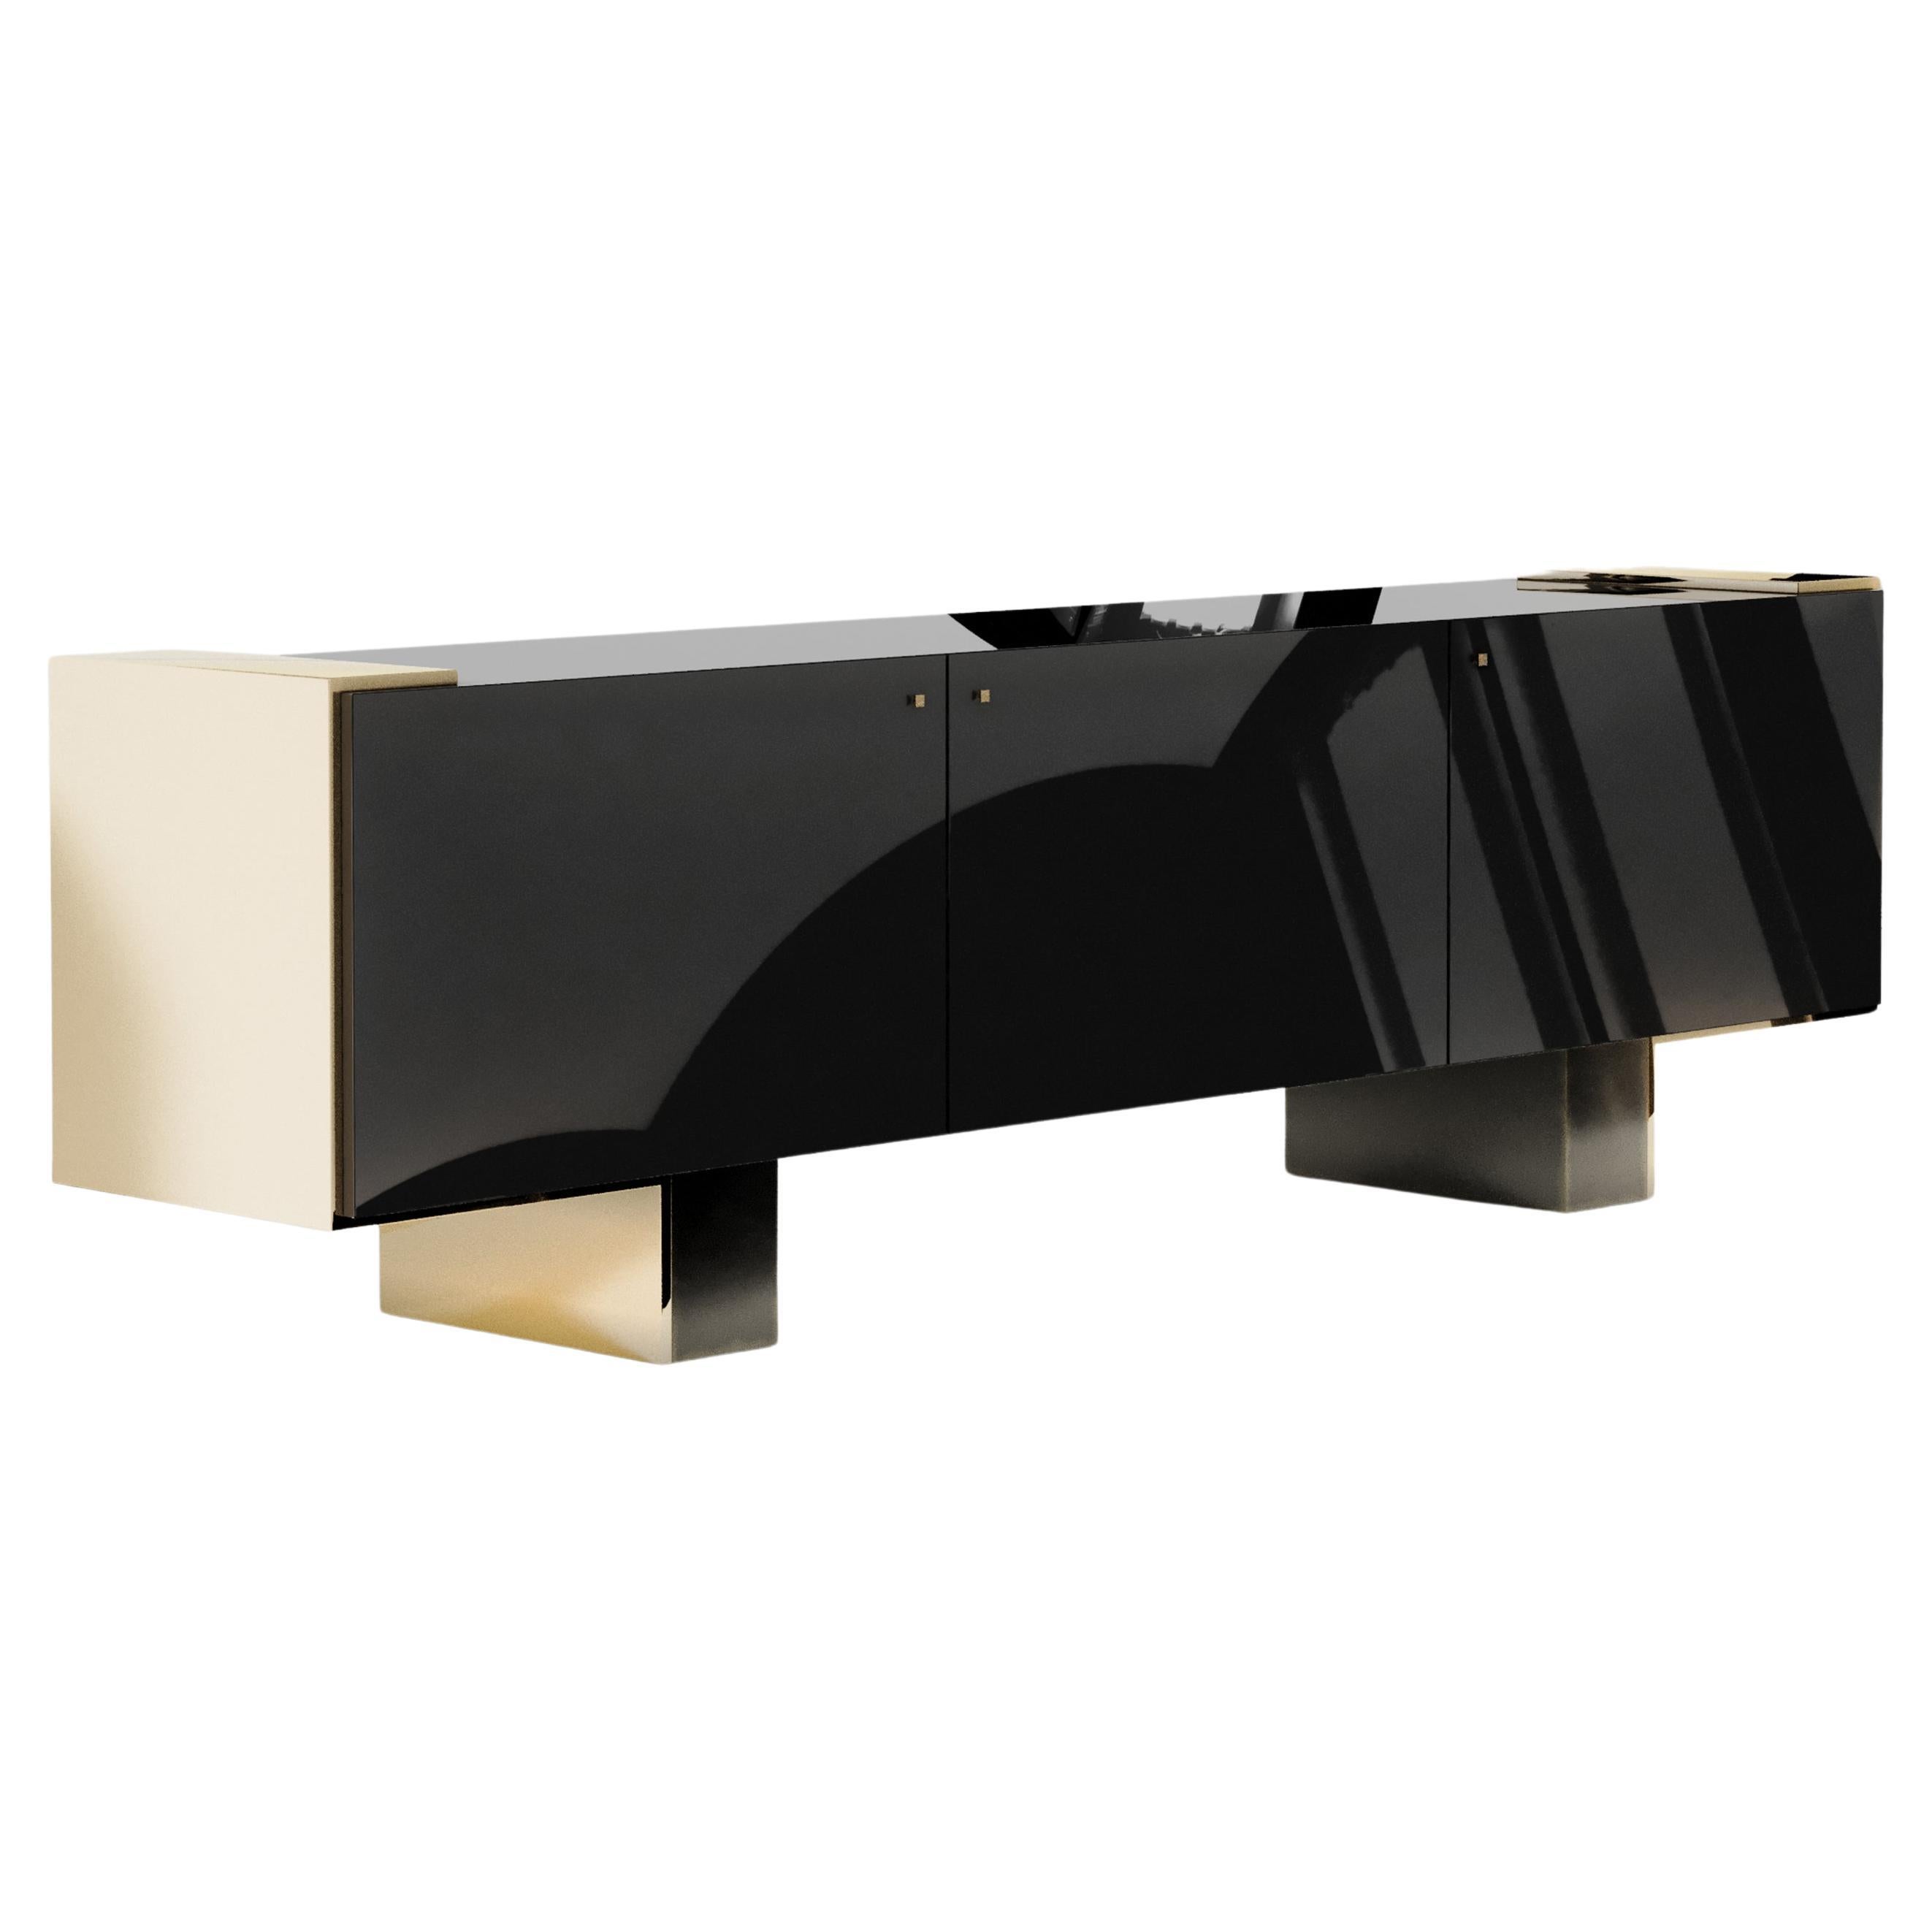 Câline Console Table in Piano Black and Polished Bronze by Palena Furniture